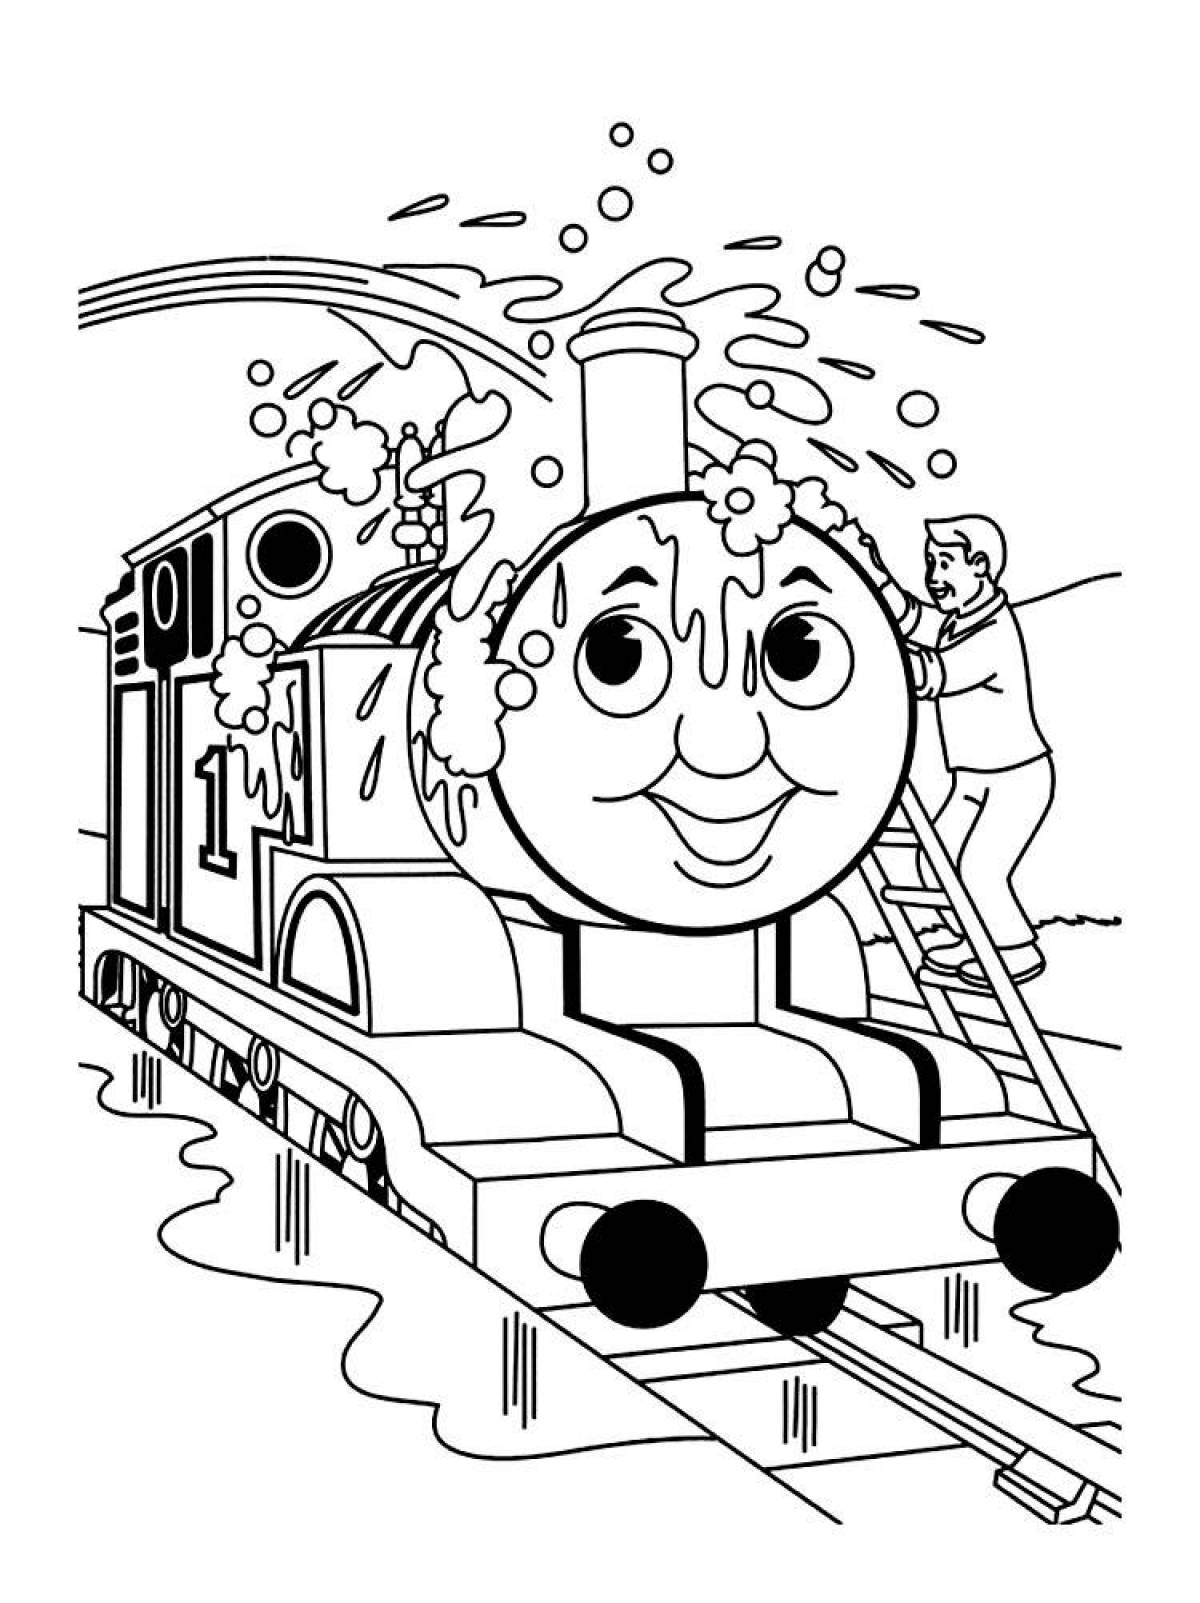 Exciting thomas the tank engine coloring book